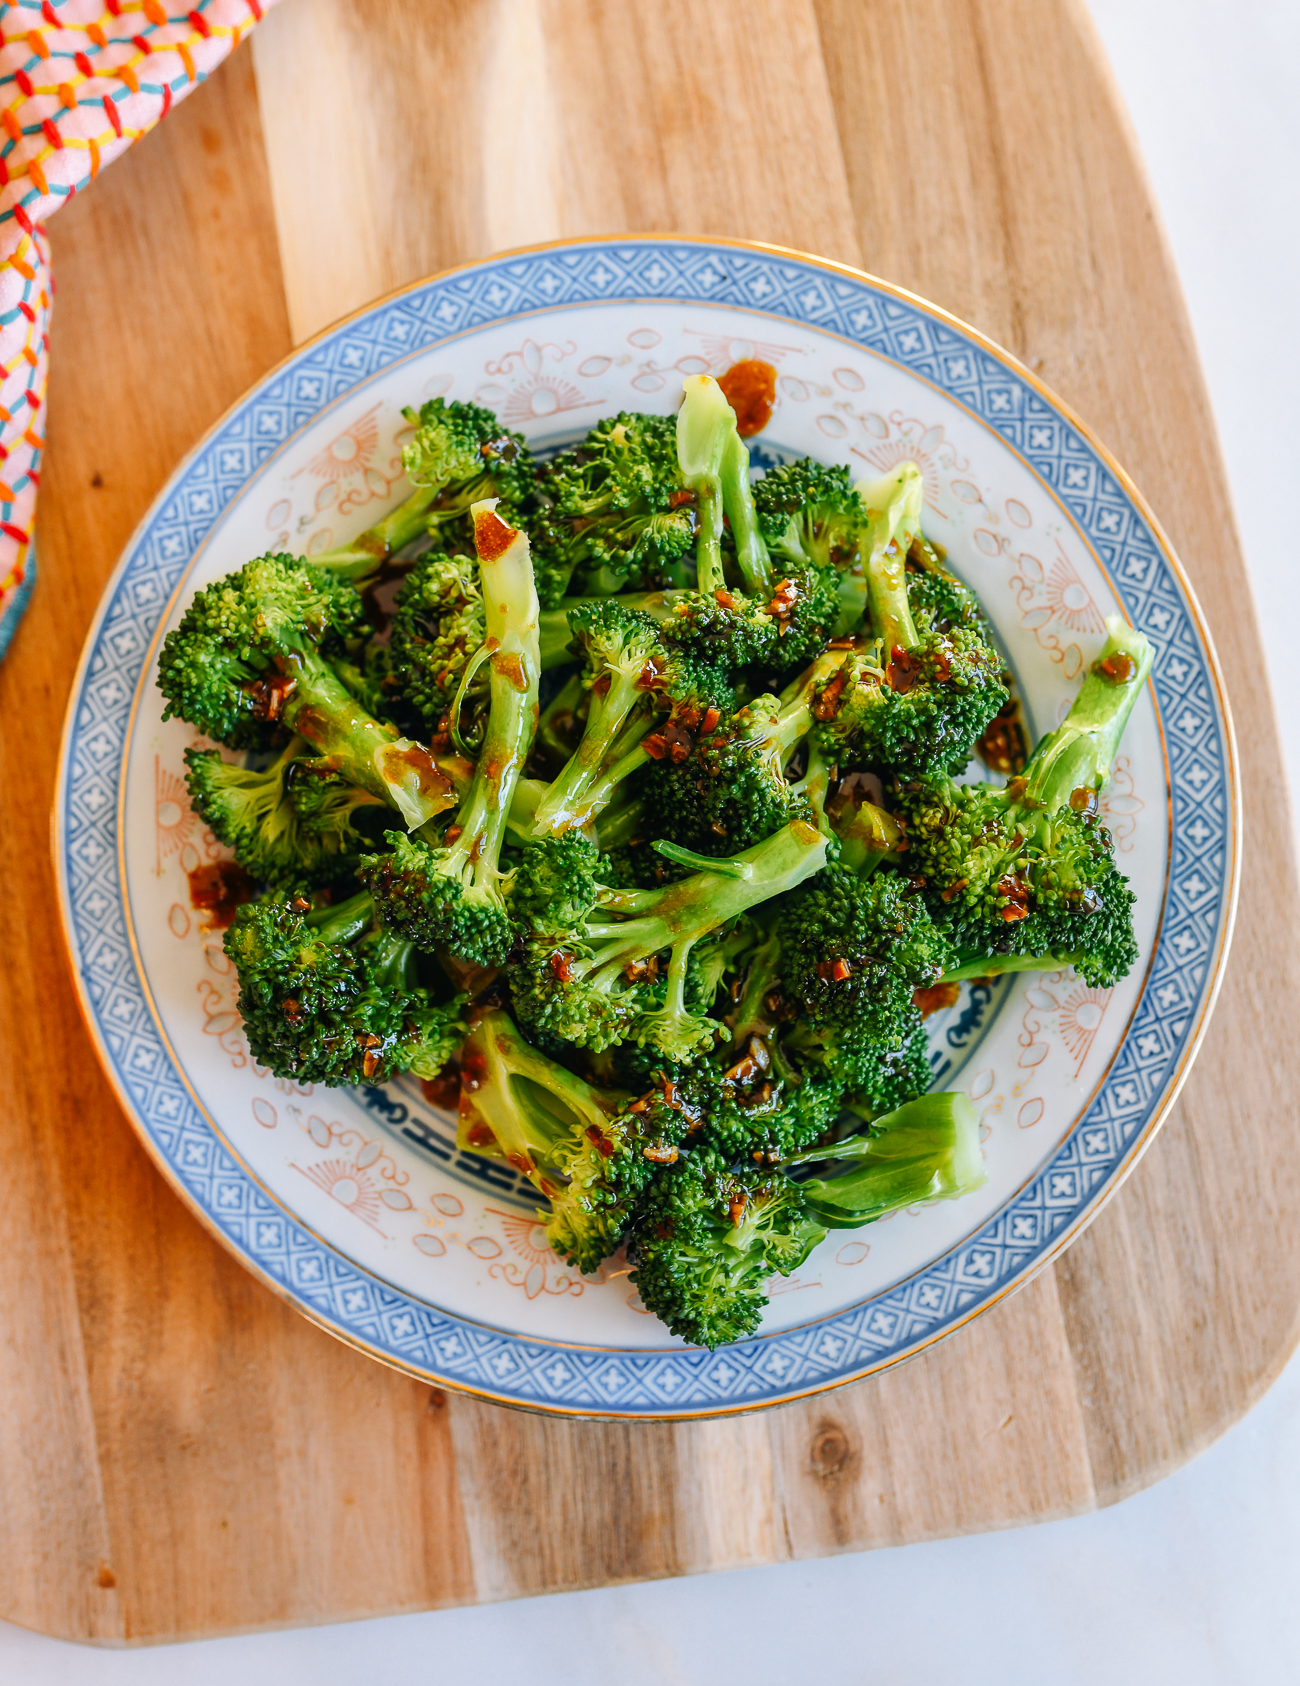 Plate of Steamed Broccoli Drizzled with sauce